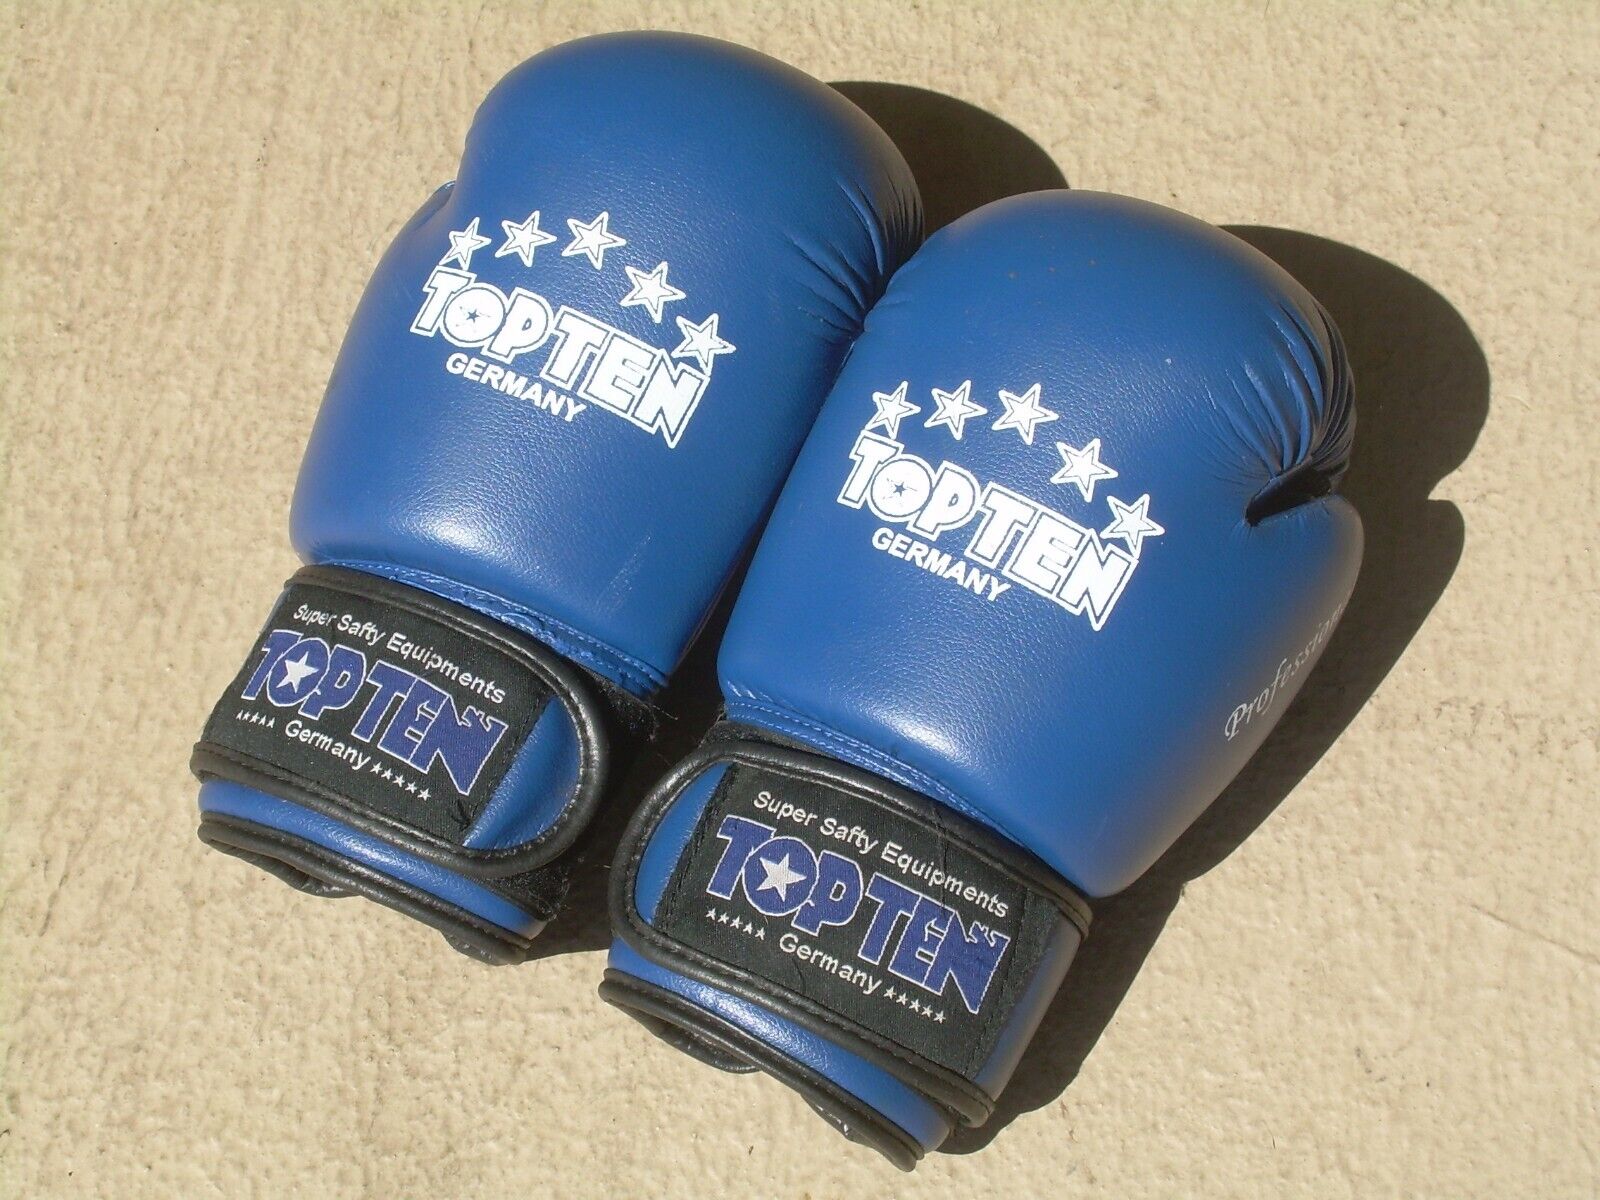 Top Ten Point Fighter Boxing MMA Gloves